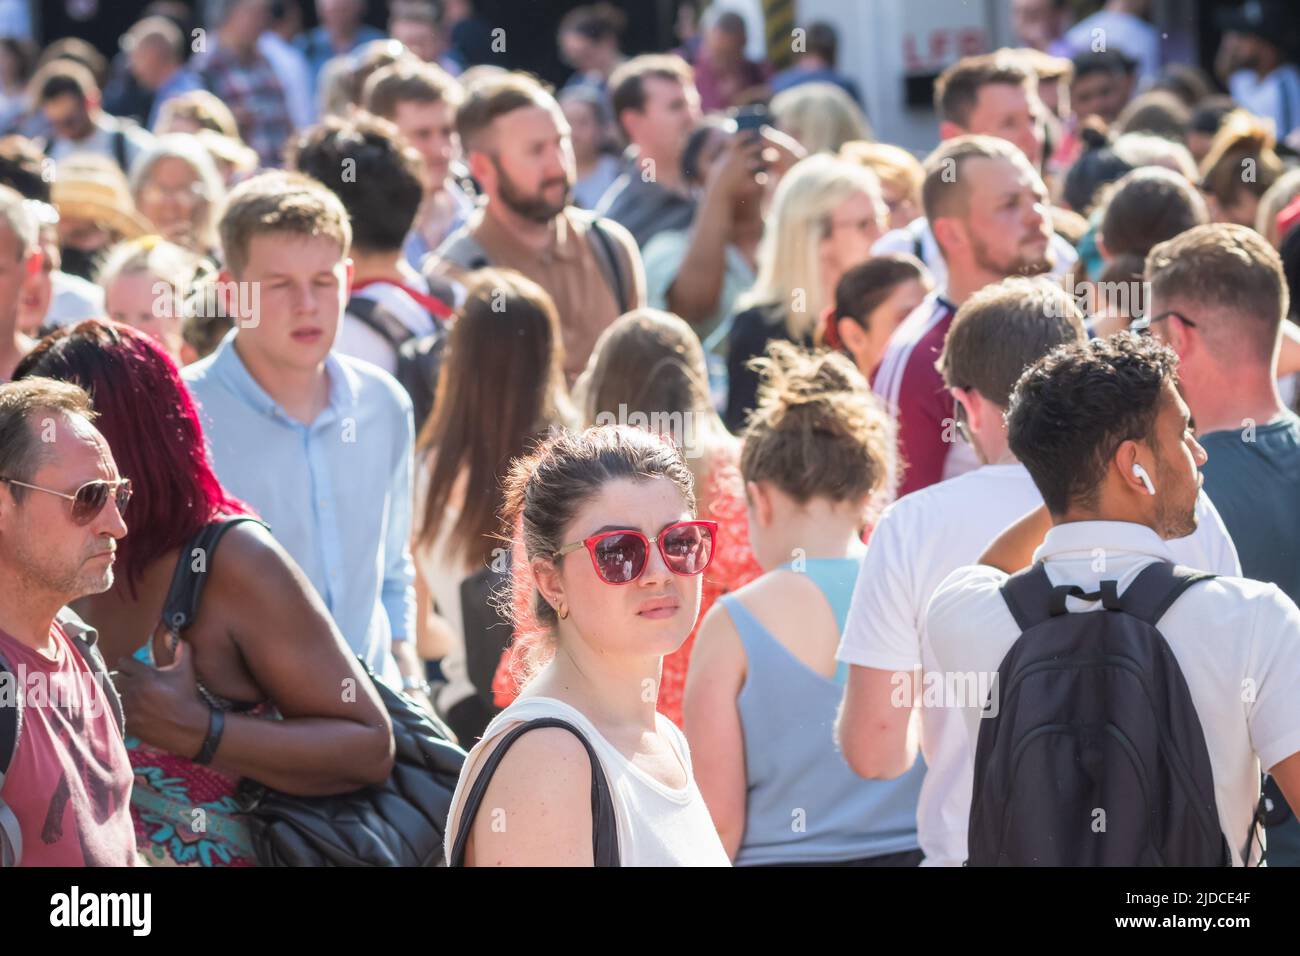 London, UK - 17 June, 2022 - Crowd of train passengers waiting frustratingly outside the Euston Station due to temporary service closure on one of the Stock Photo